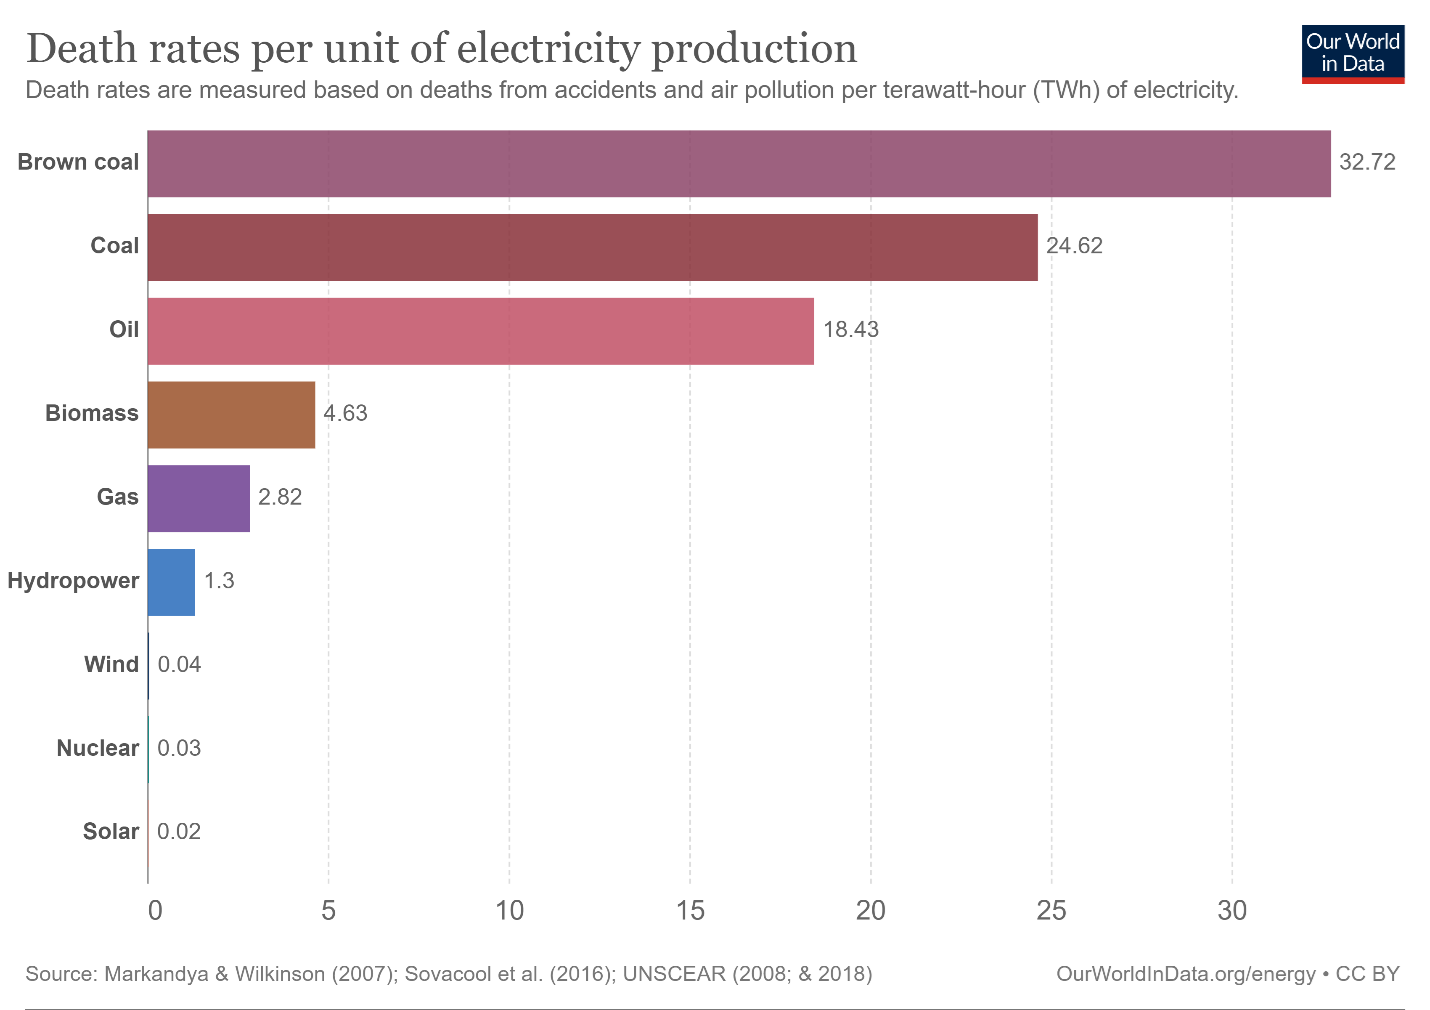 Chart showing death rates per terawatt-hour of electricity production, organized by various sources of electricity. According to Our World in Data, electricity generated by brown coal has led to the most deaths over time, per terawatt-hour of generation, while nuclear is the second-safest.